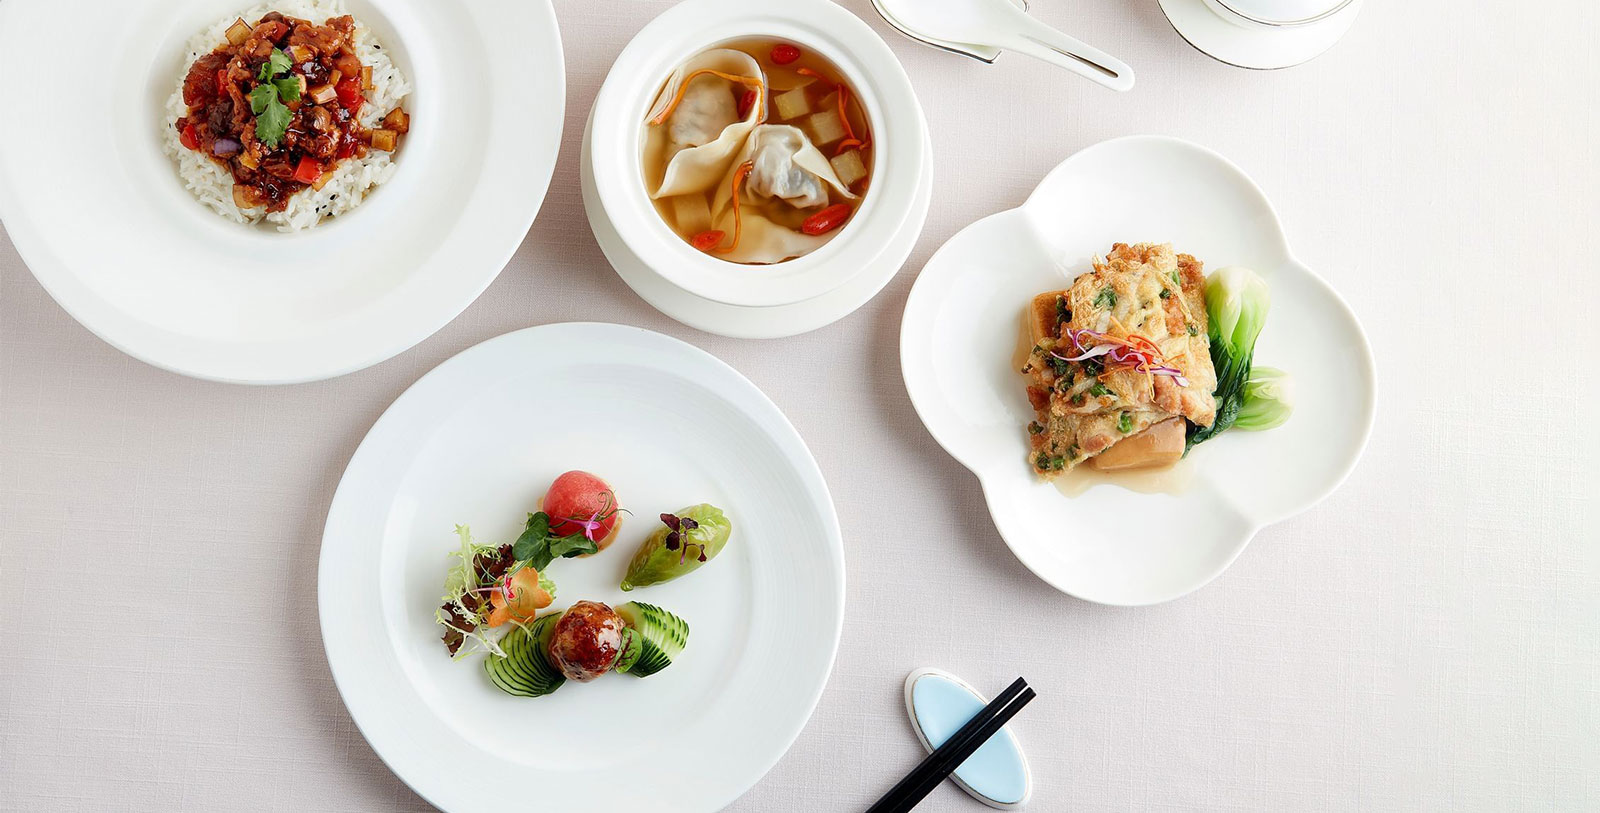 Taste Singapore's culinary culture at Jade, the hotel's exquisitely designed restaurant.